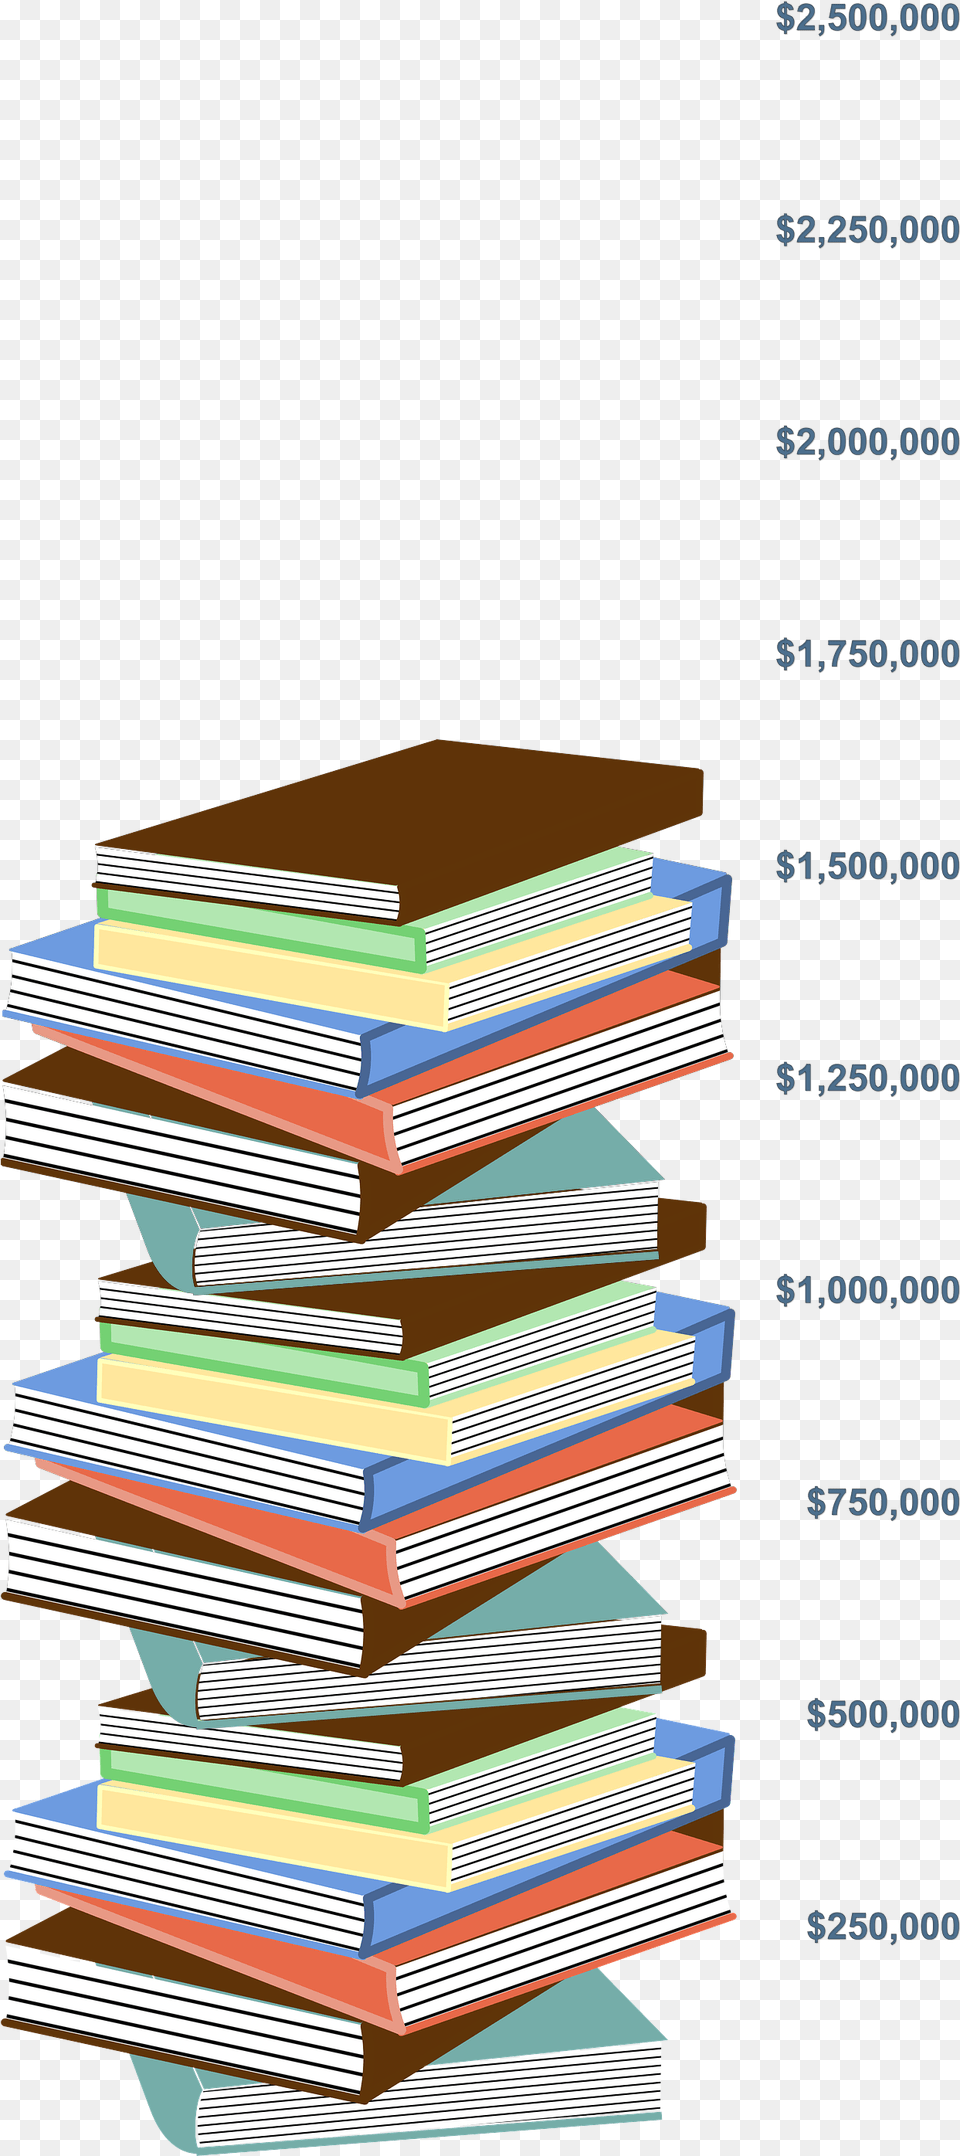 Raised So Far Book Stack Image Stack Of Books, Publication, Page, Text, Indoors Png